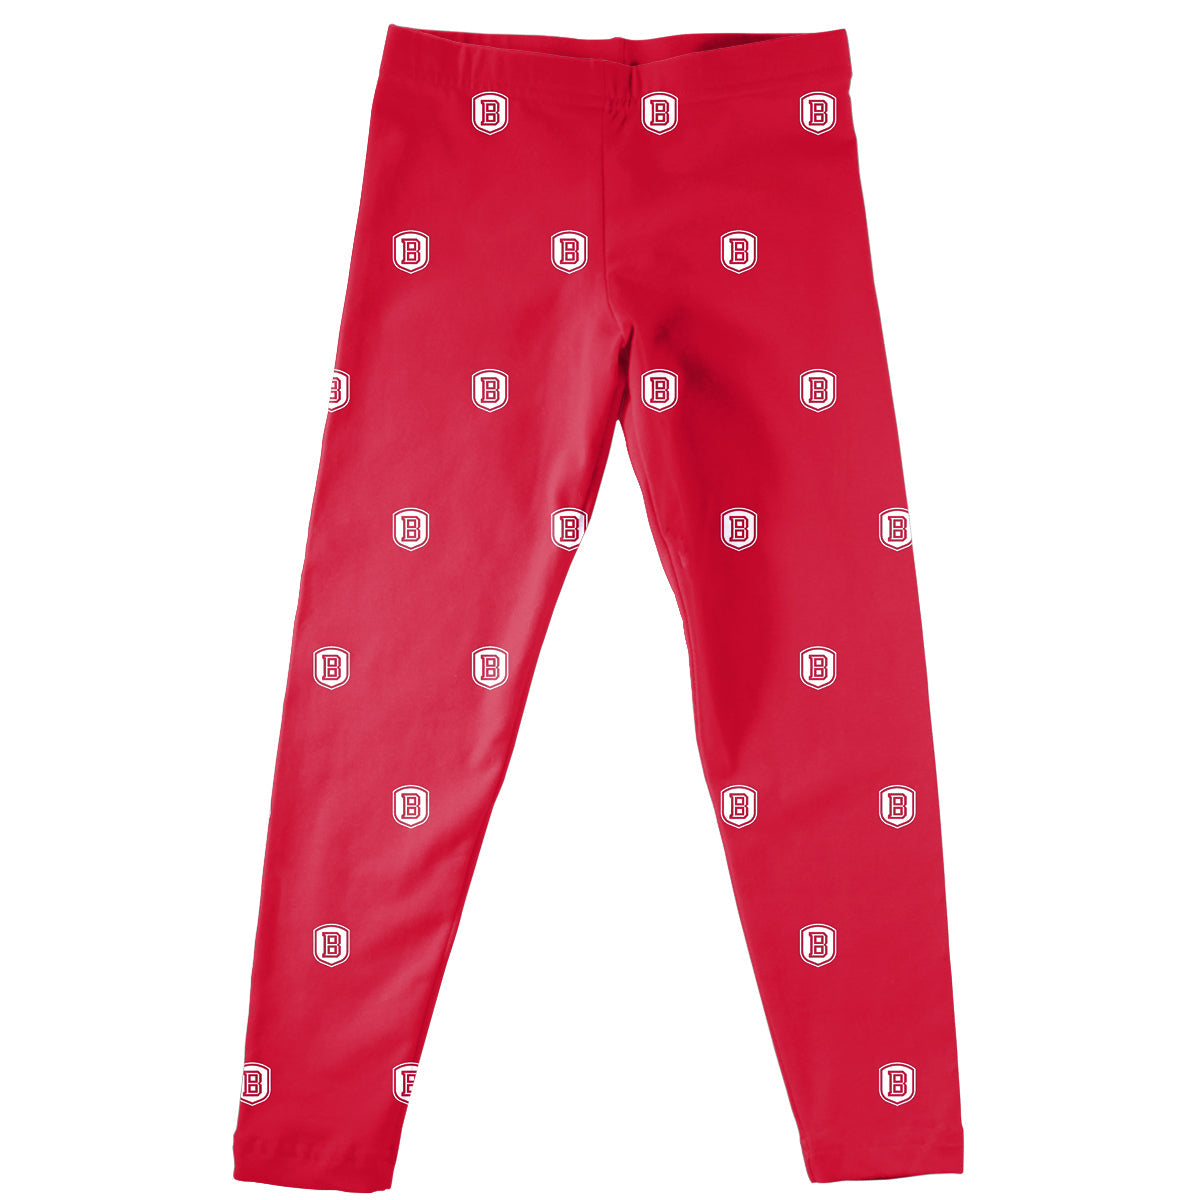 Bradley Braves Girls Game Day Classic Play Red Leggings Tights